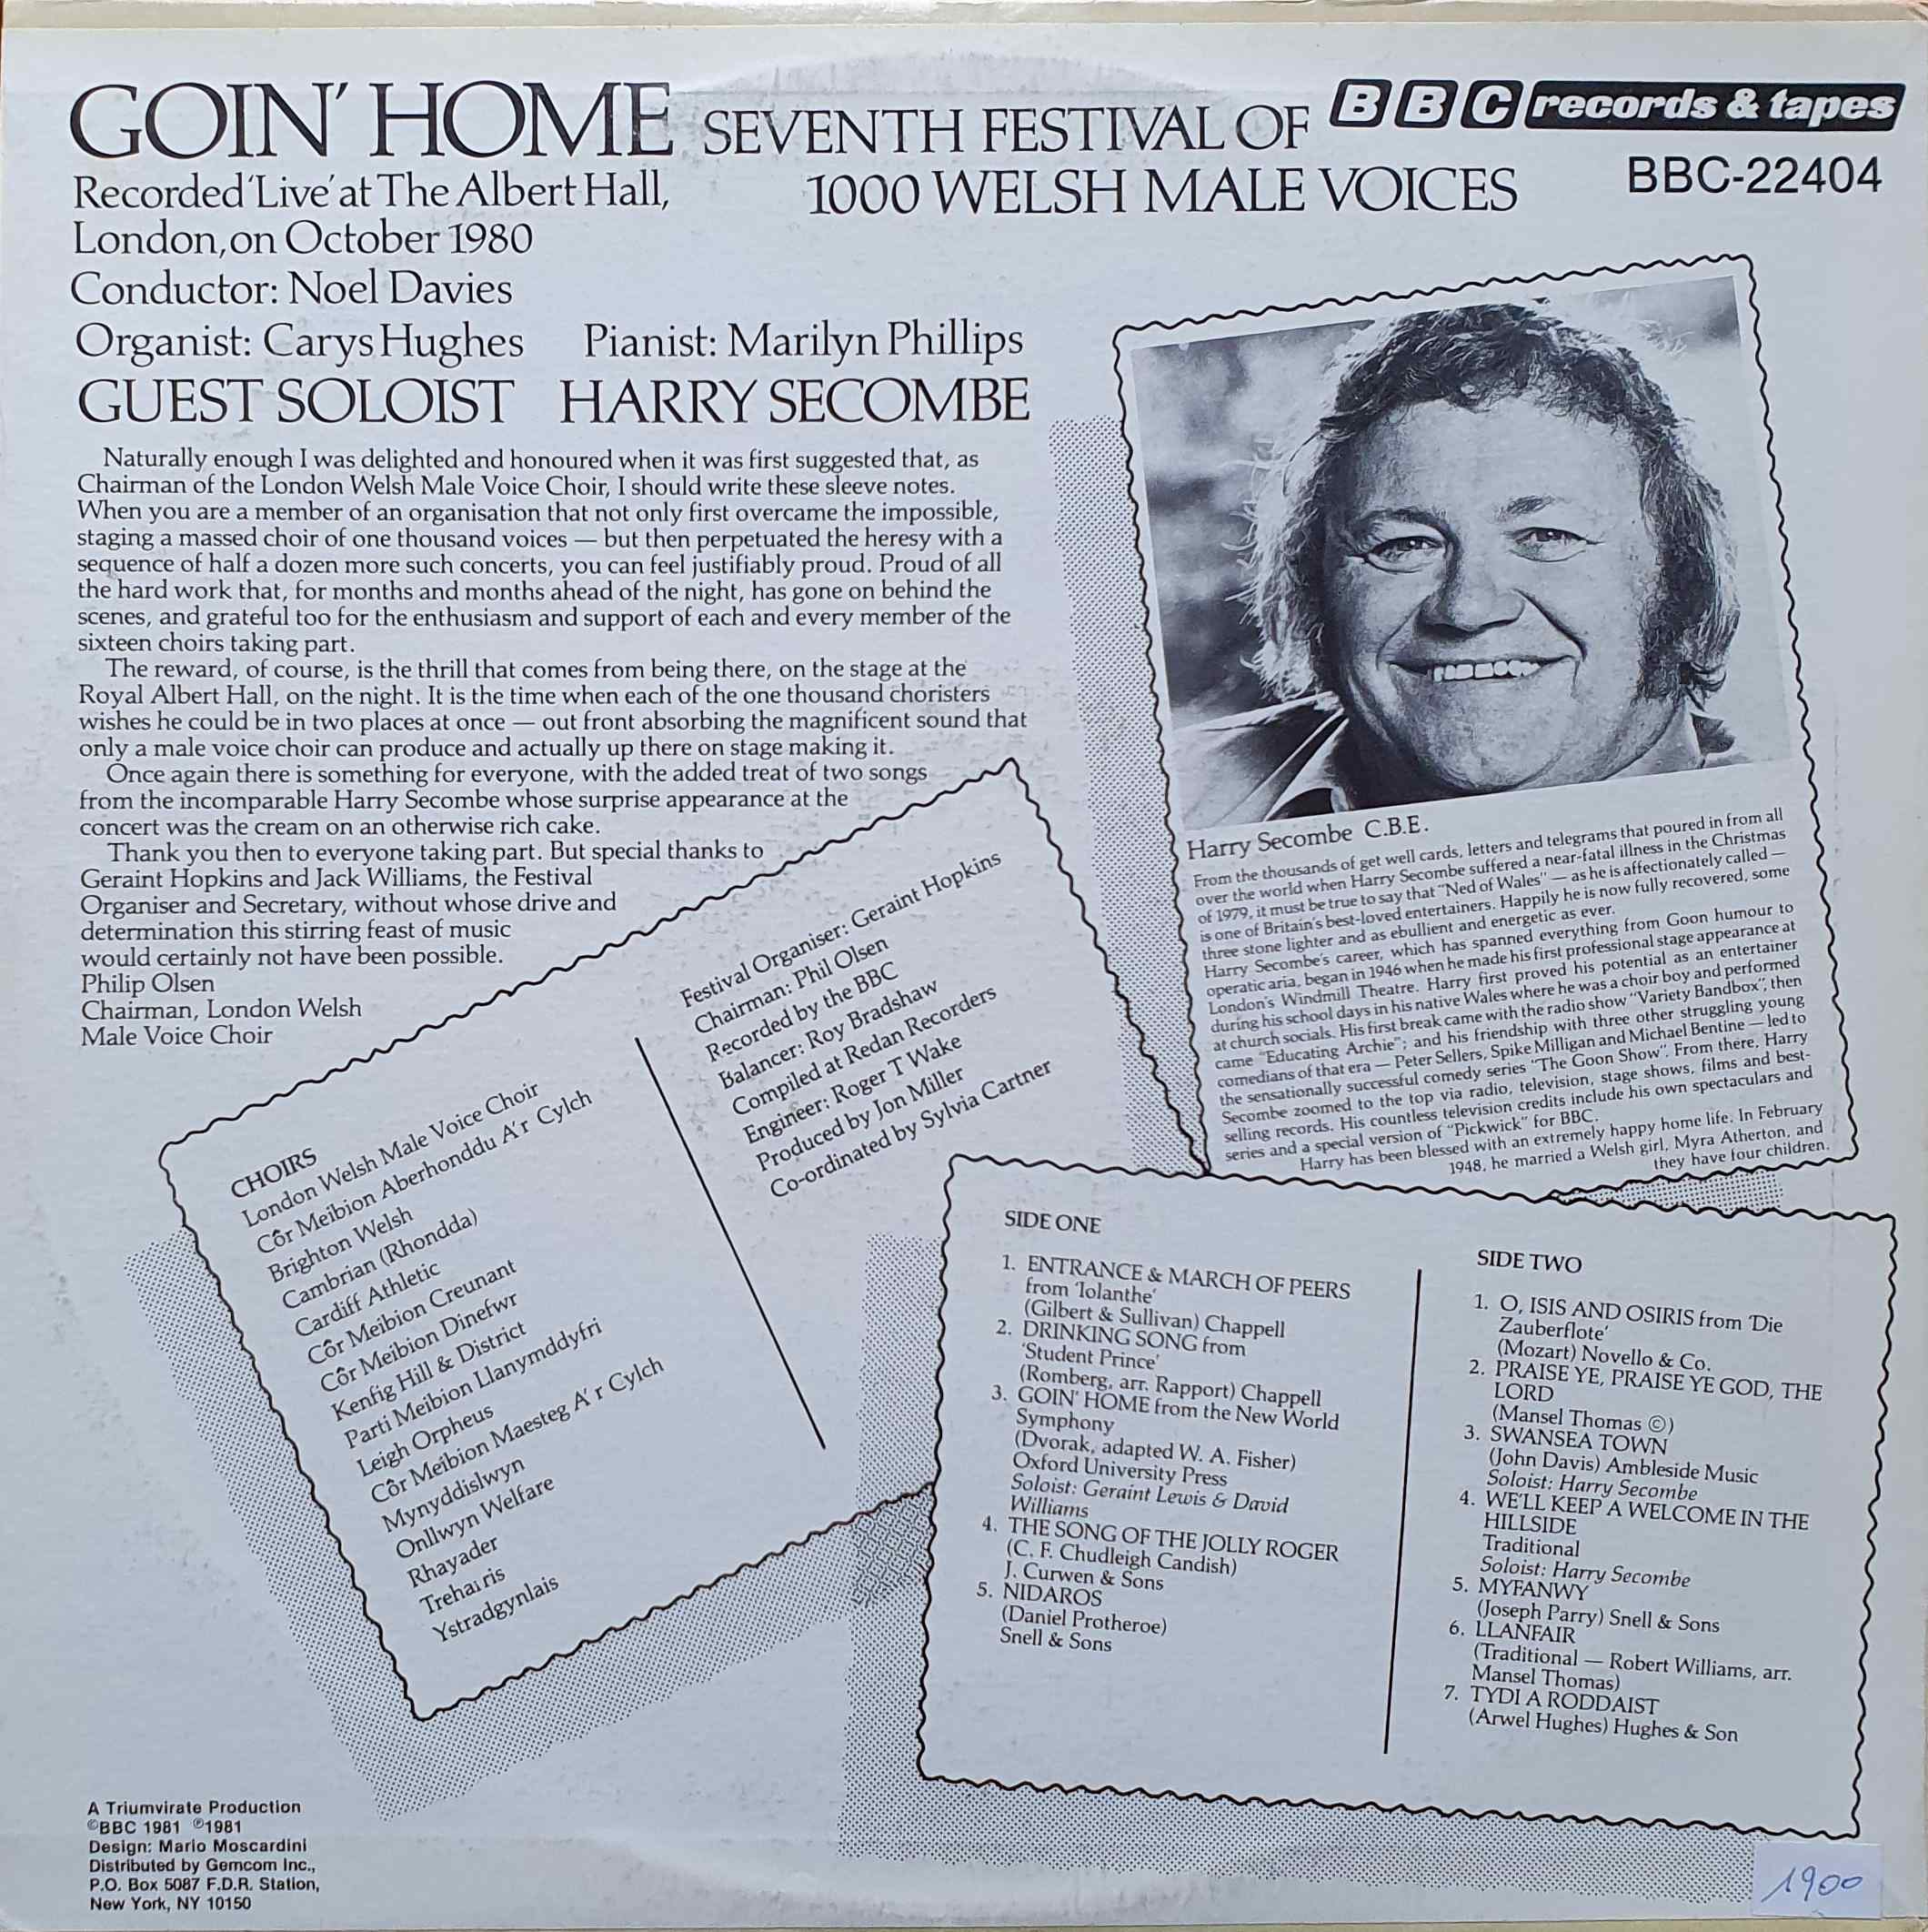 Picture of BBC - 22404 Goin' home - 1000 Welsh male voices by artist Various from the BBC records and Tapes library